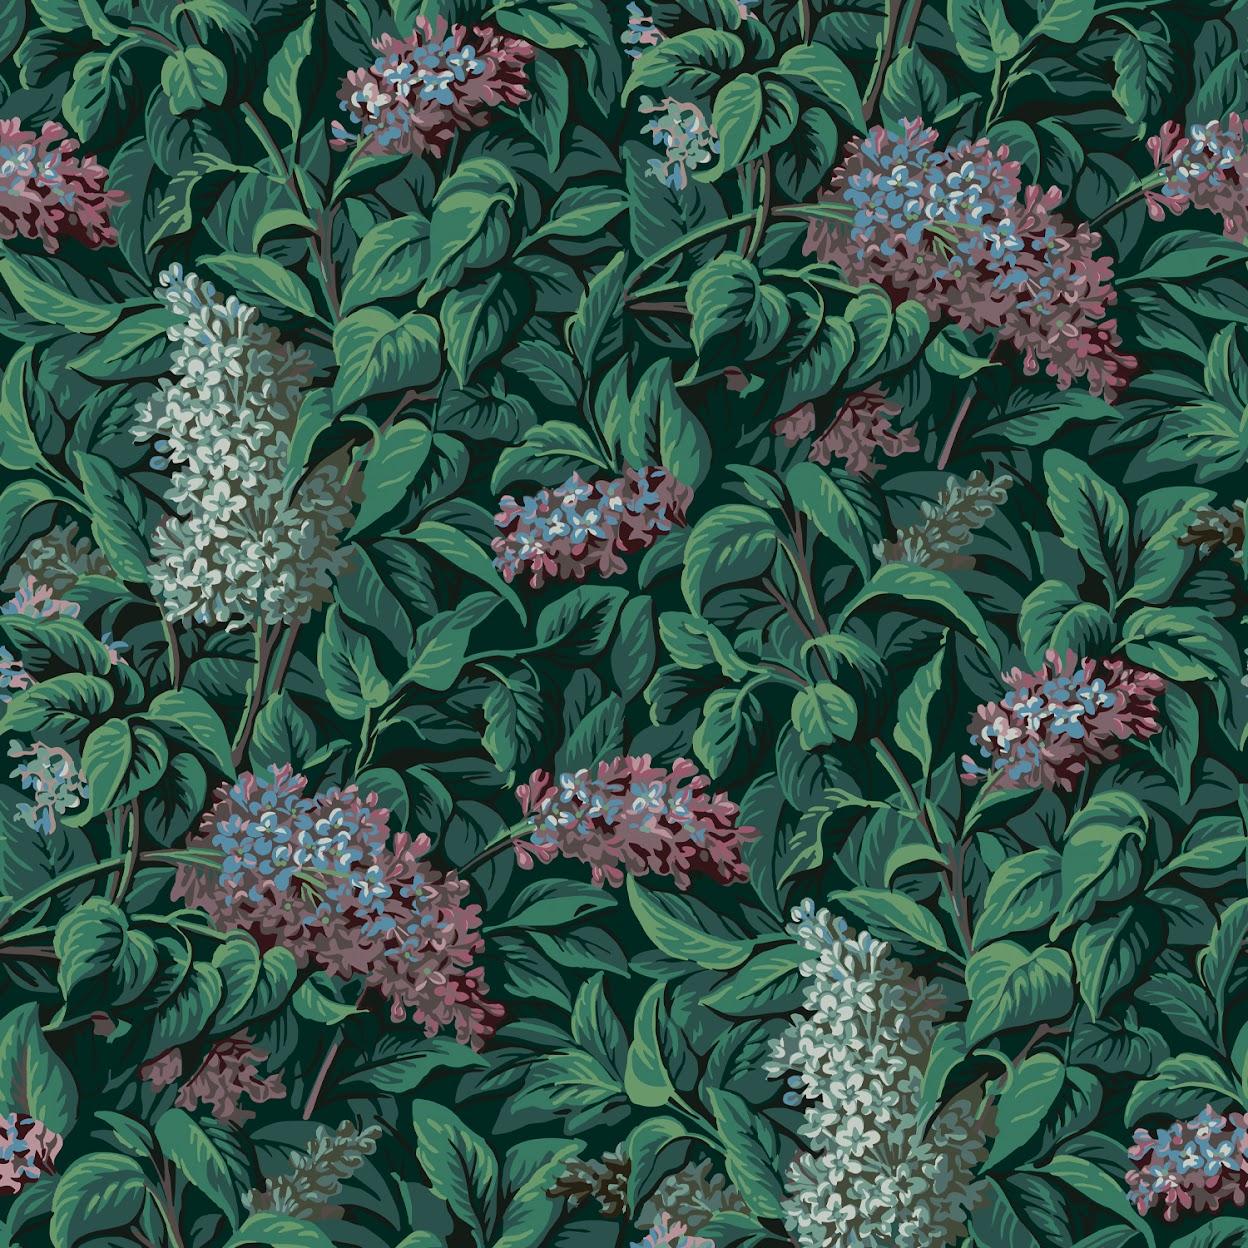 Repeat: 71,9 cm / 28.3 in

Founded in 2019, the French wallpaper brand Papier Francais is defined by the rediscovery, restoration, and revival of iconic wallpapers dating back to the French “Golden Age of wallpaper” of the 18th and 19th centuries.